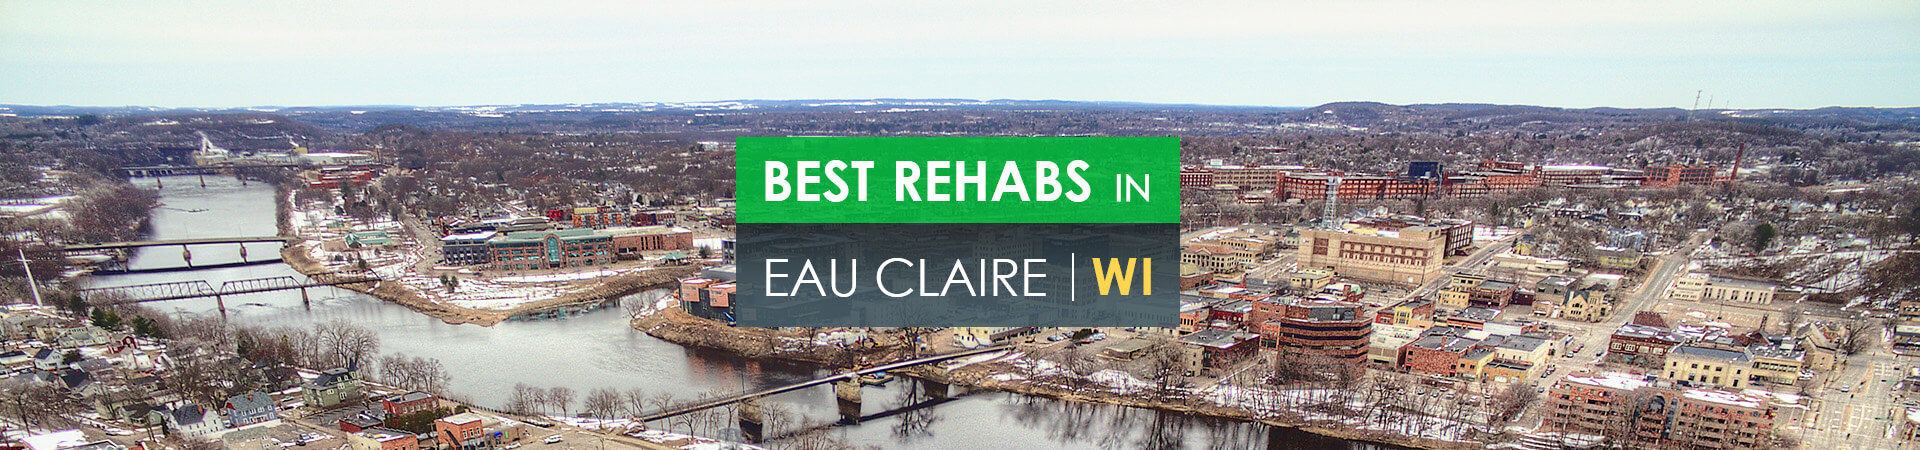 Best rehabs in Eau Claire, WI